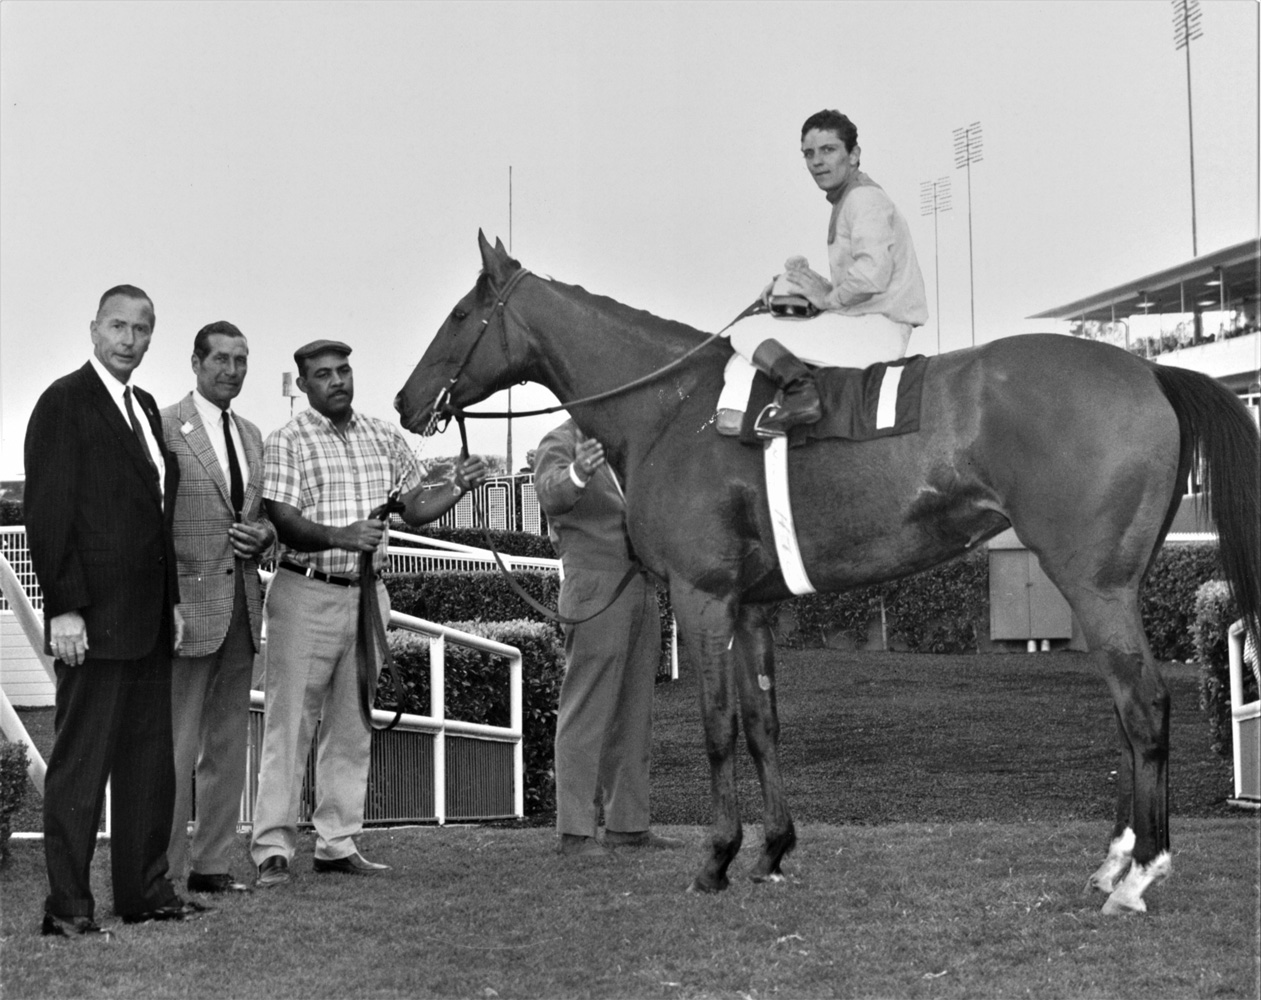 Gamely (Wayne Harris up) in the winner's circle for the 1969 Wilshire Handicap at Hollywood Park (Keeneland Library Thoroughbred Times Collection)